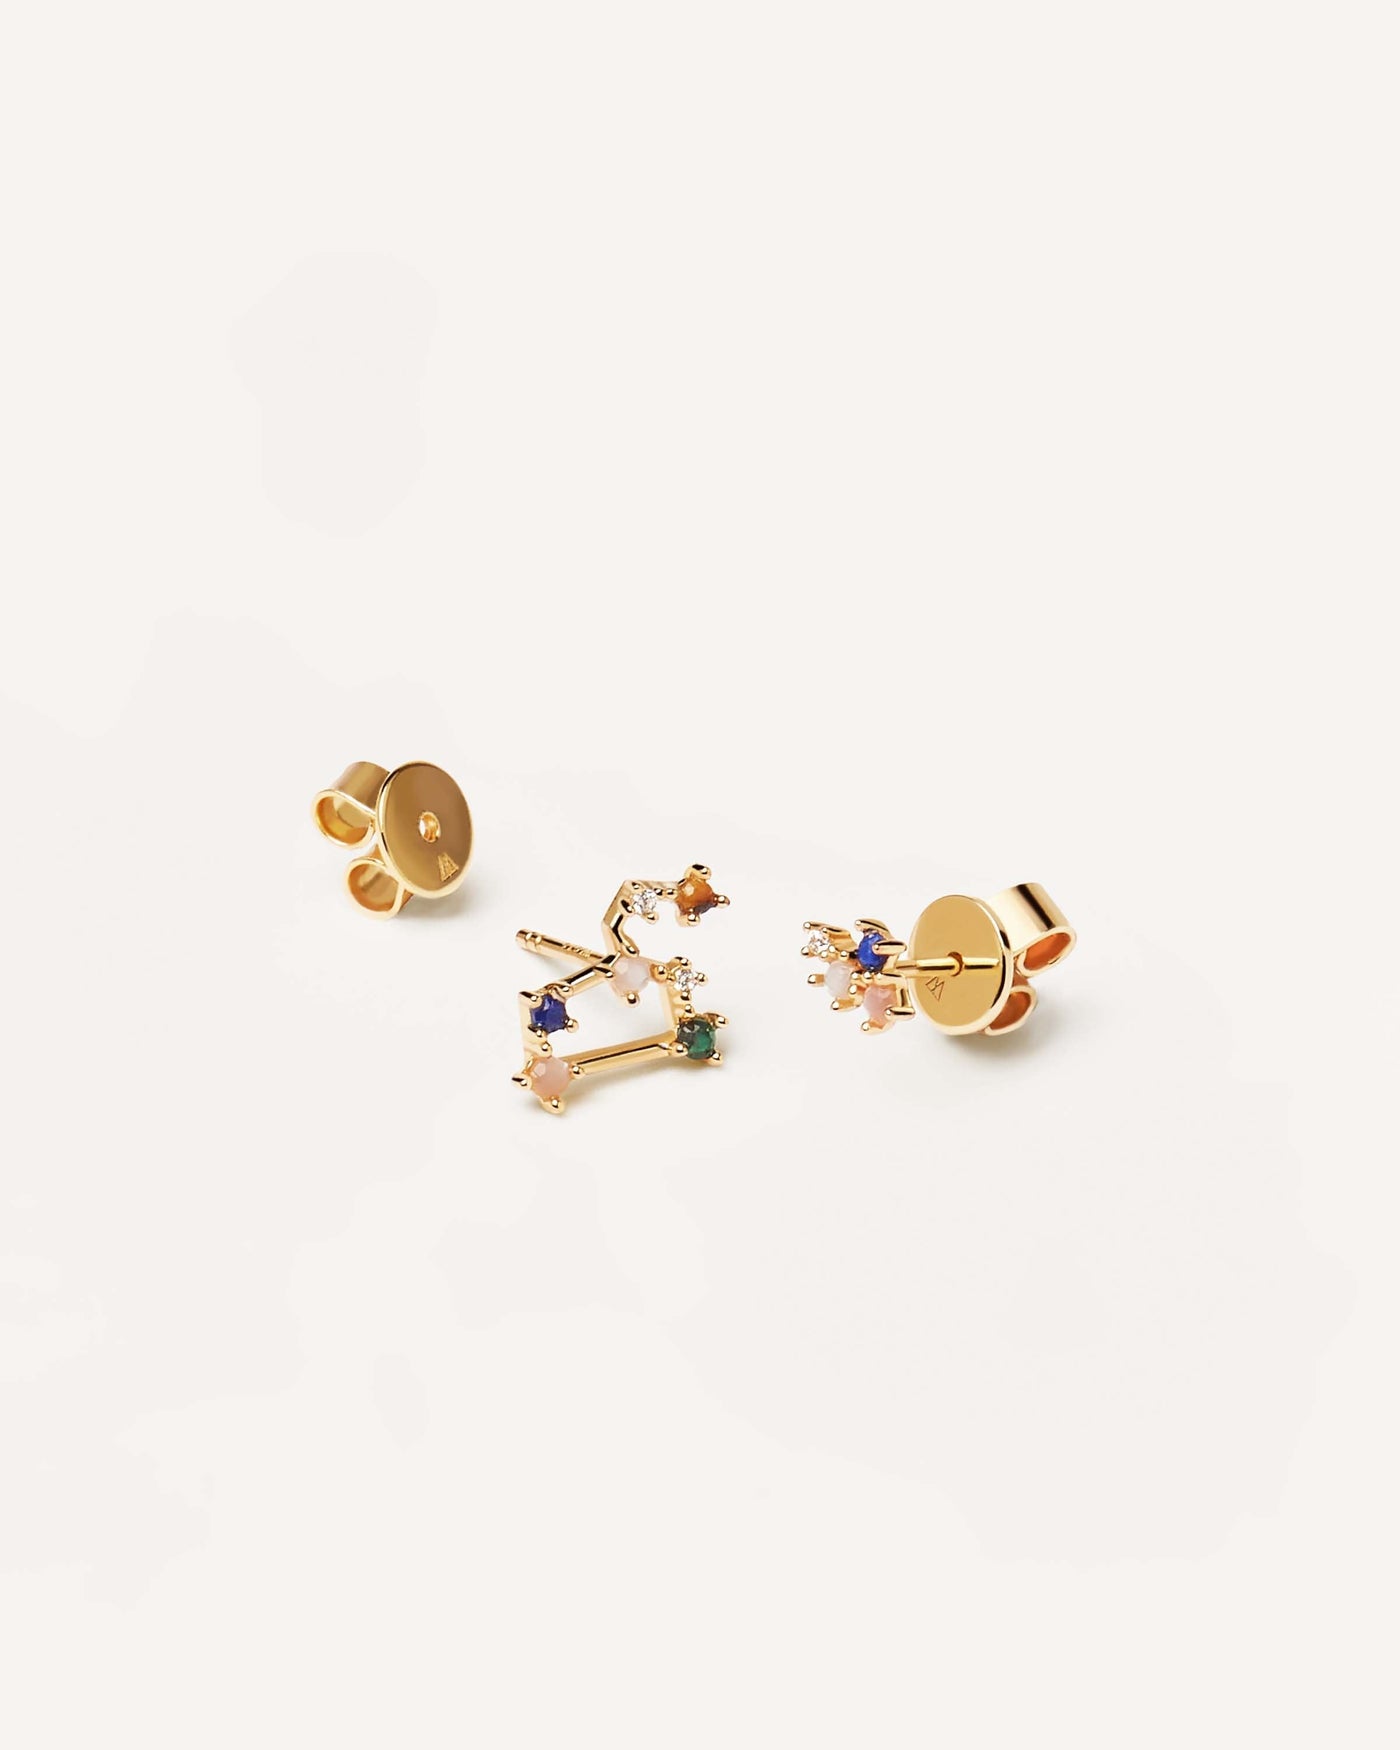 2028 Selection | Zodiac Constellations Earrings. Get the latest arrival from PDPAOLA. Place your order safely and get this Best Seller. Free Shipping over 70€